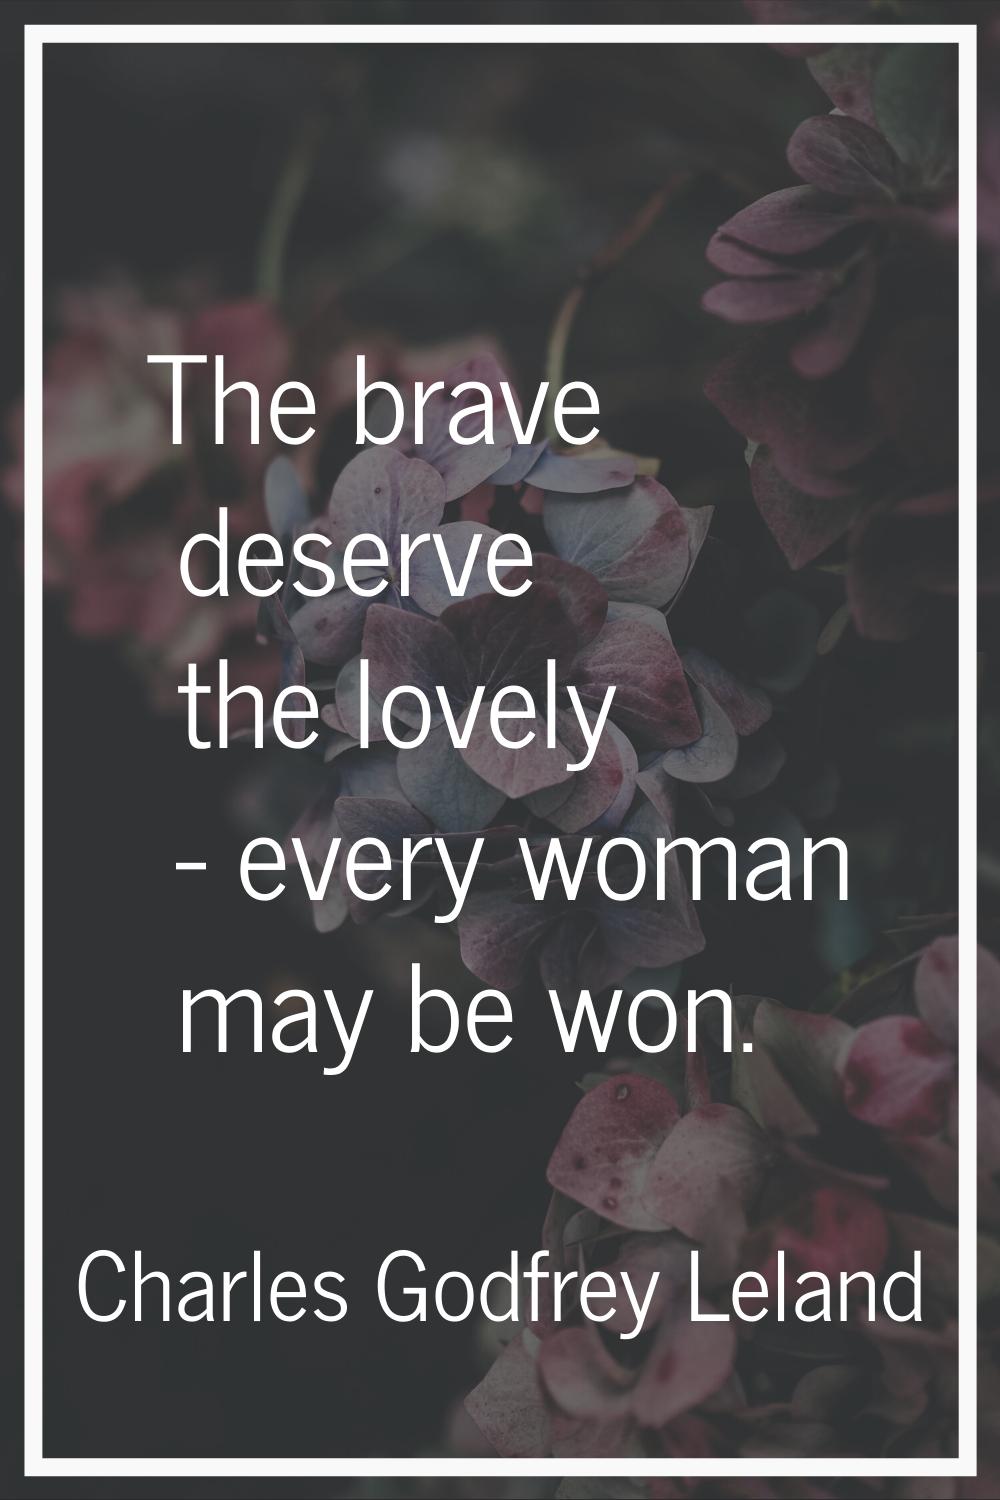 The brave deserve the lovely - every woman may be won.